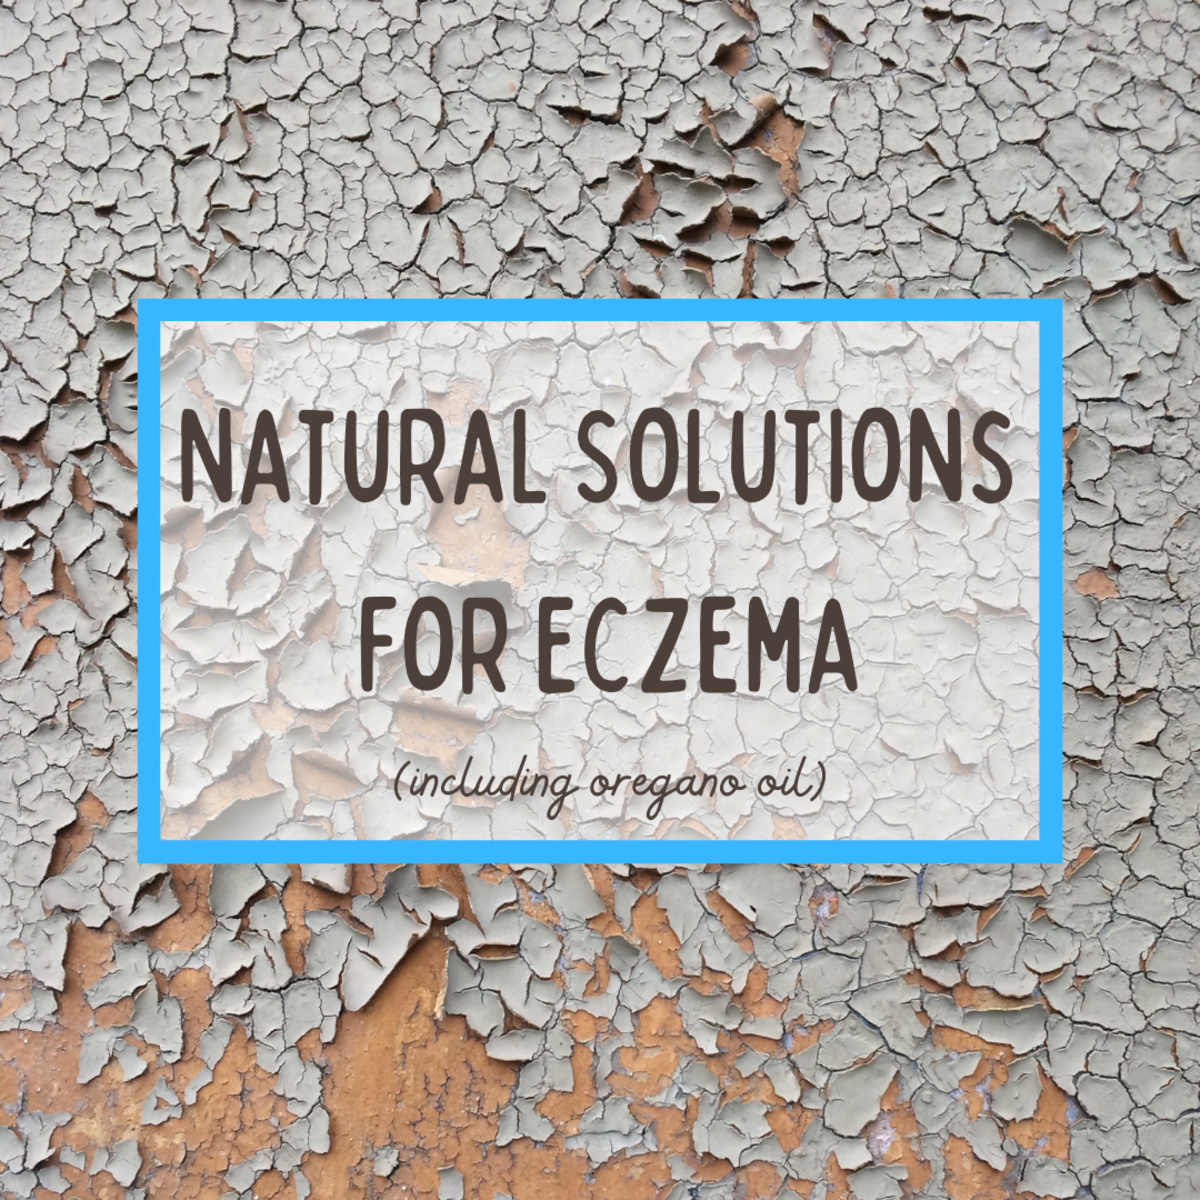 Can you solve eczema with items at home?